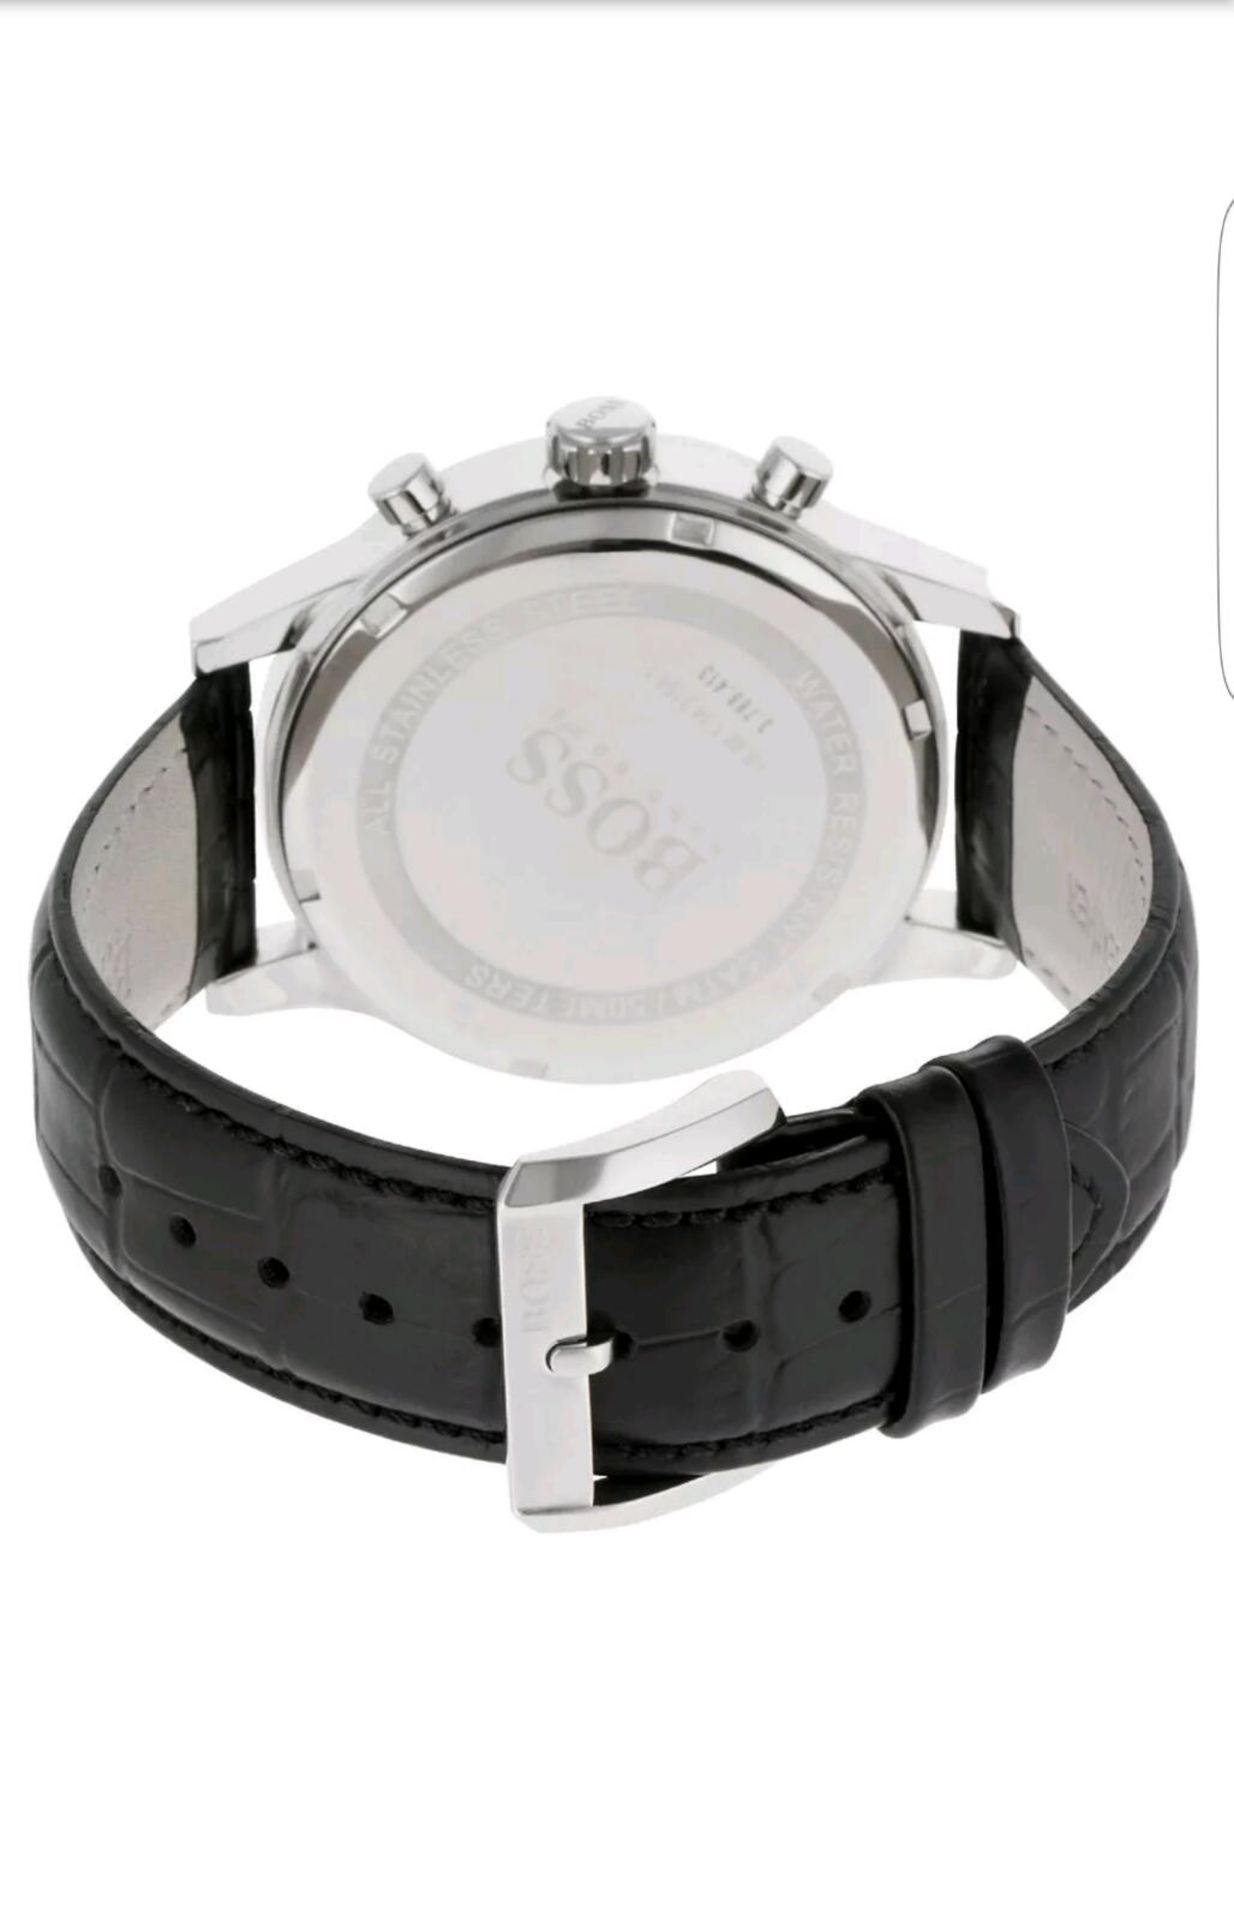 BRAND NEW GENTS HUGO BOSS WATCH 1512448, COMPLETE WITH ORIGINAL PACKAGING AND MANUAL - FREE P & P - Image 2 of 2